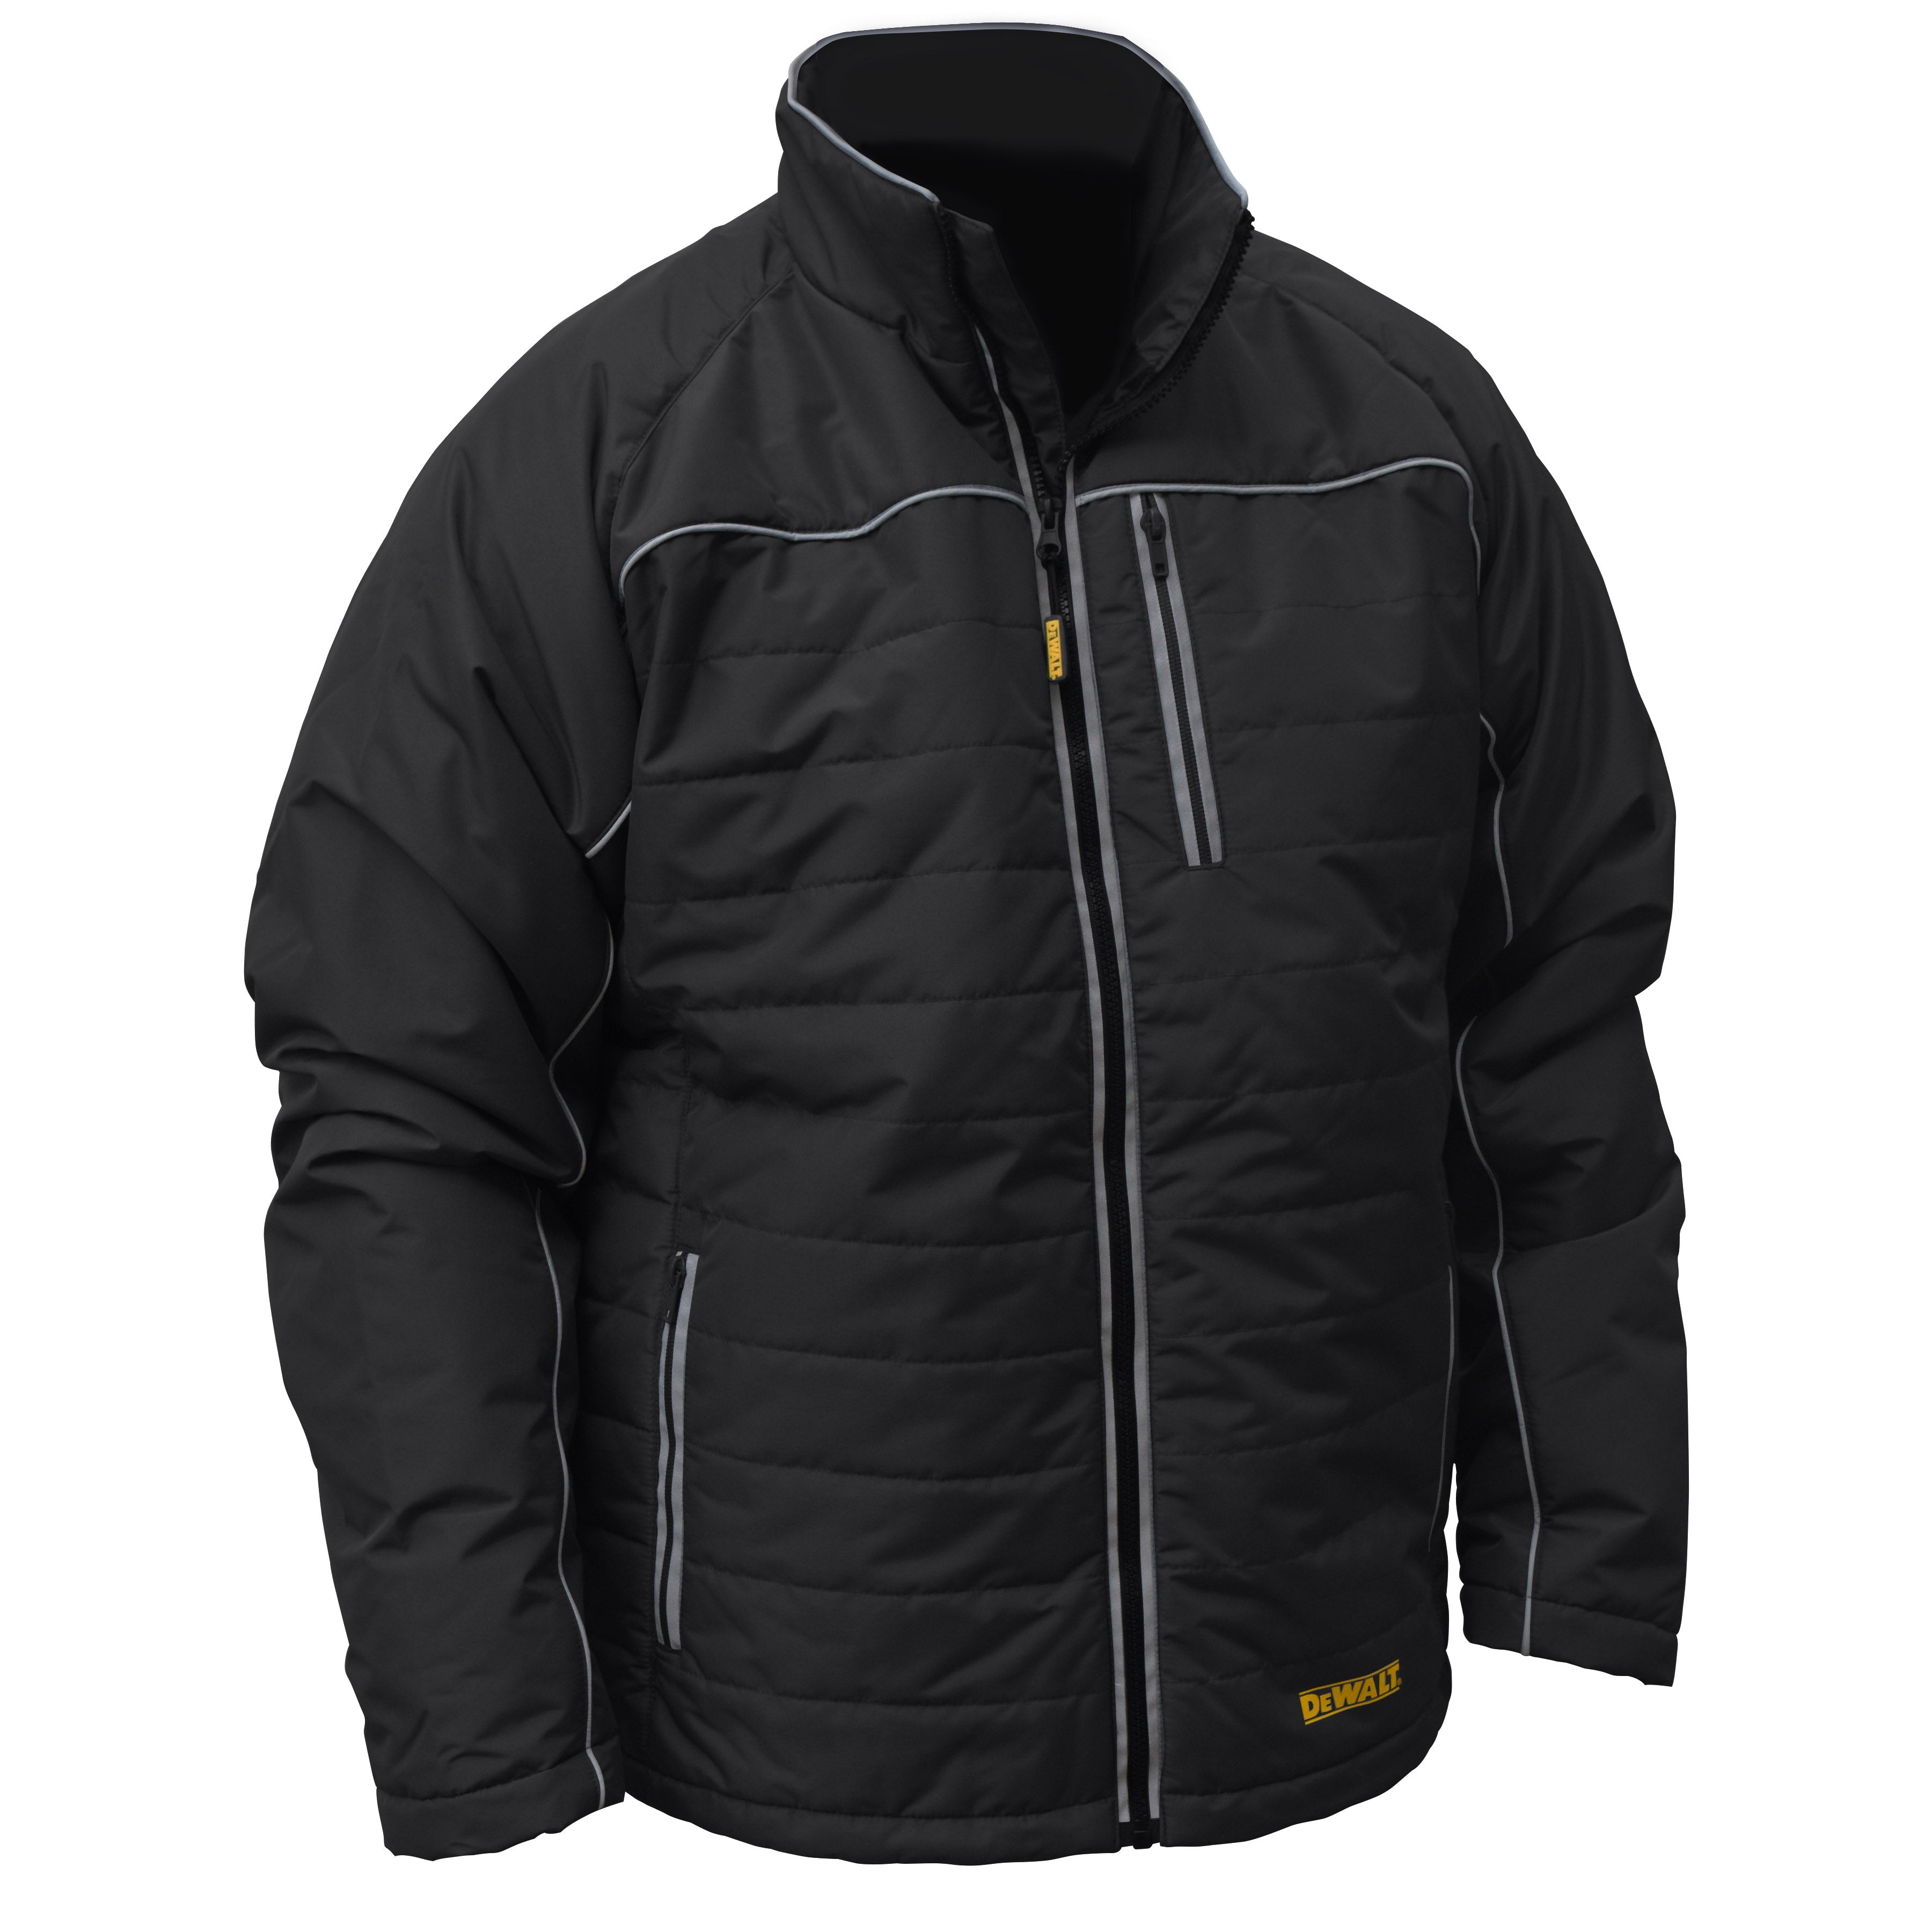 DEWALT Men's Heated Quilted Soft Shell Jacket without Battery